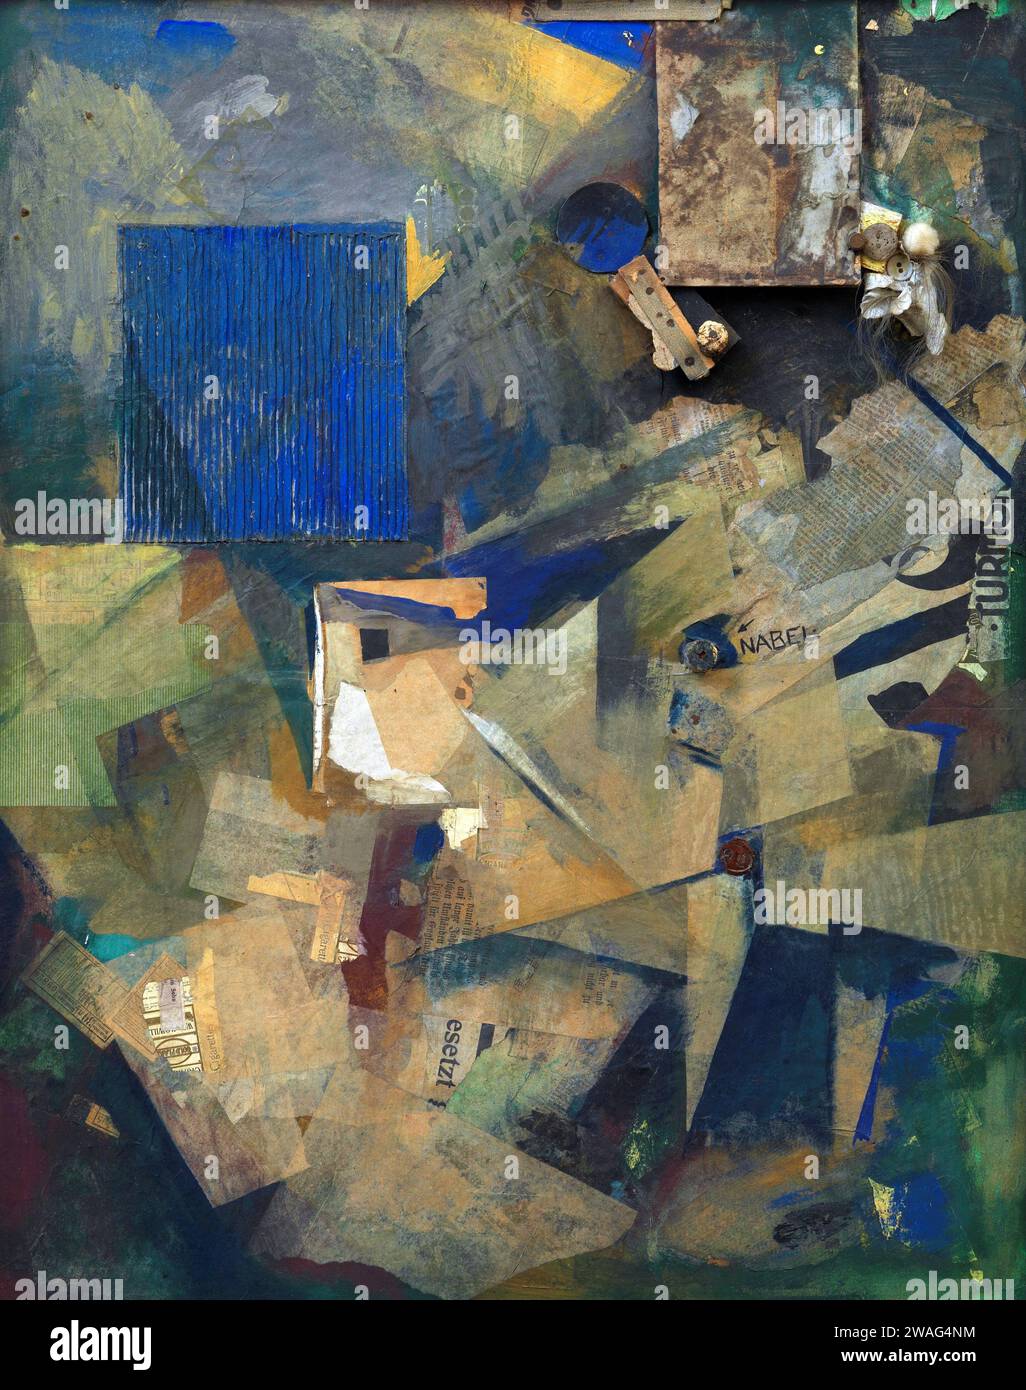 Kurt Schwitters. Painting entitled Merz Picture 21 b, The Hair-Navel Picture by Kurt Hermann Eduard Karl Julius Schwitters (1887-1948), mixed technique, 1920 Stock Photo